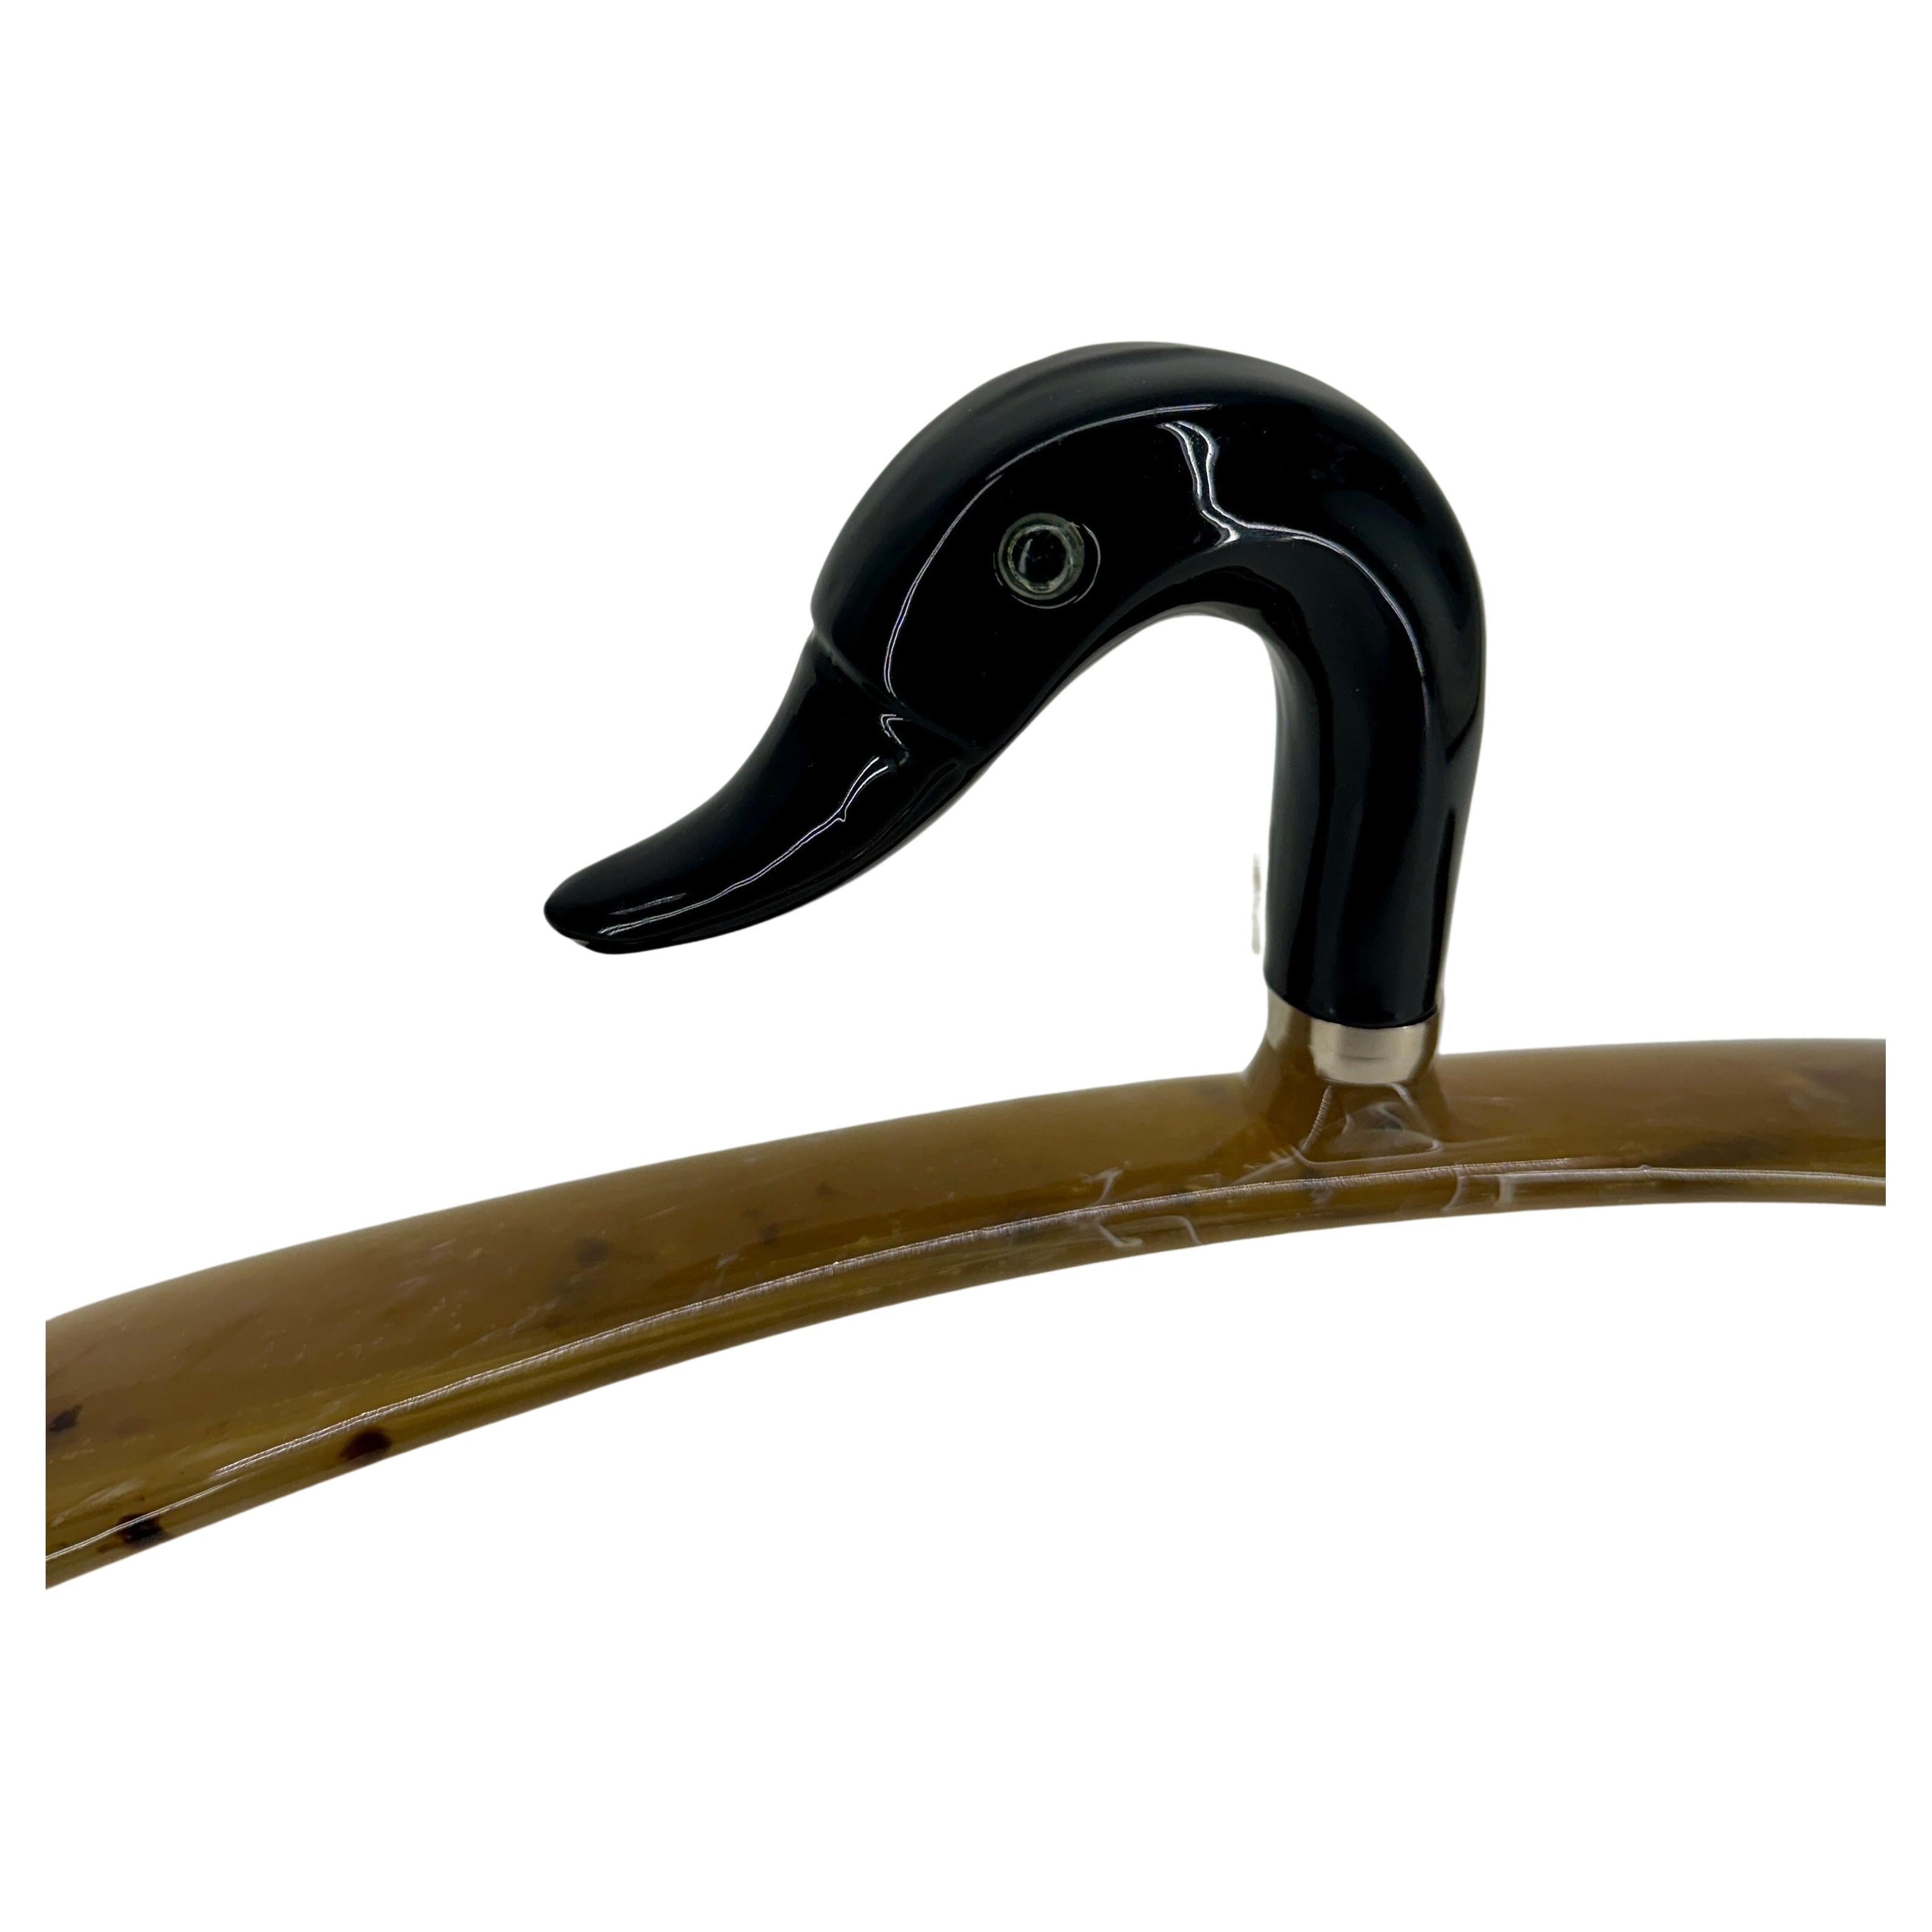 Lucite Clothes Hanger Featuring a Duck, Italy

Crafted in Italy, this heavy-duty acrylic hanger features a beautiful amber lucite resin finish. Both form and function, this duck certainly would add a touch of elegance and is suitable for coats,